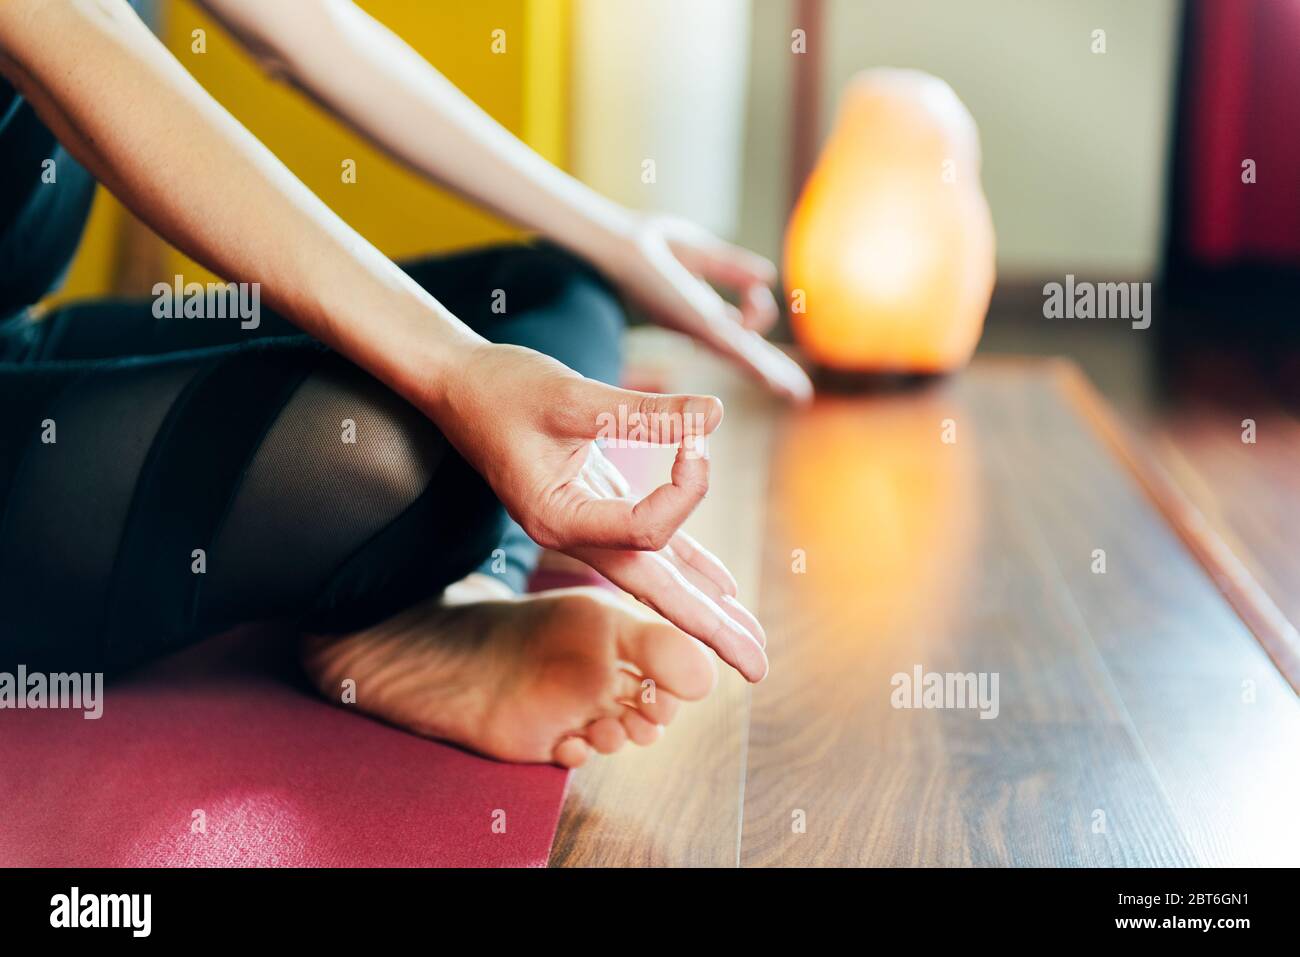 detail of woman's hands in relaxation yoga position Concept of tranquility and spirituality of Yoga Stock Photo